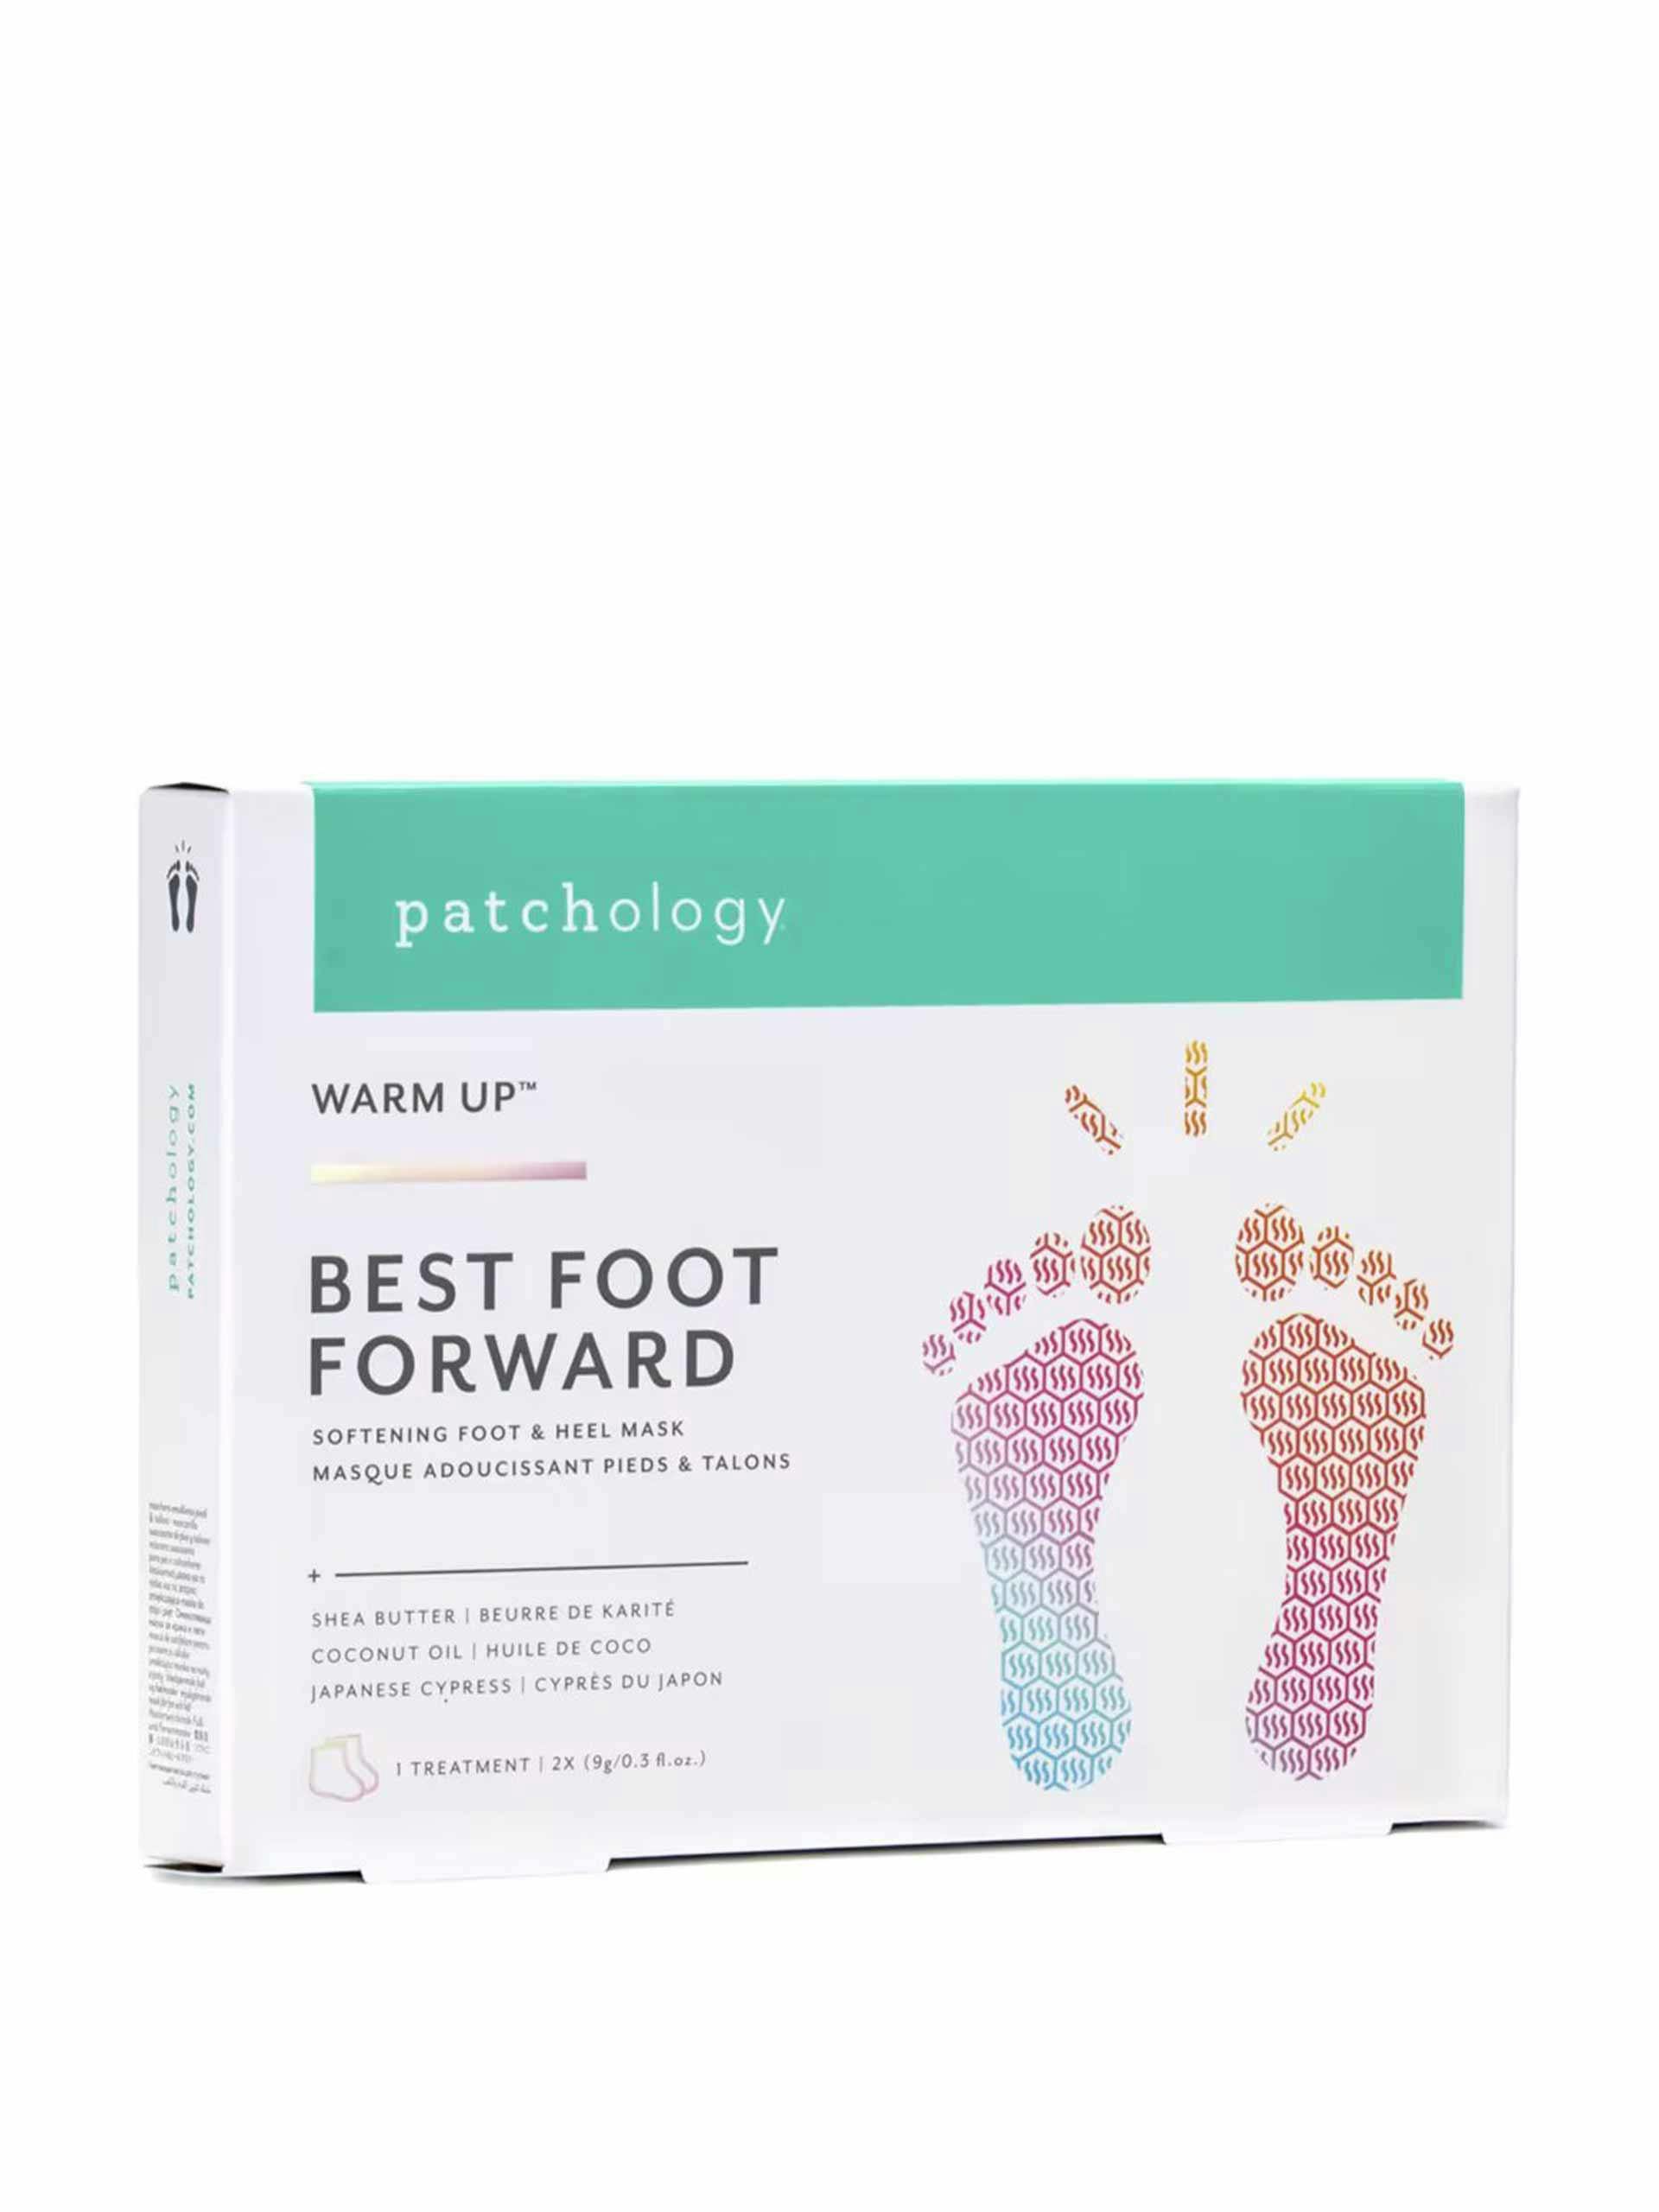 Softening foot and heel mask